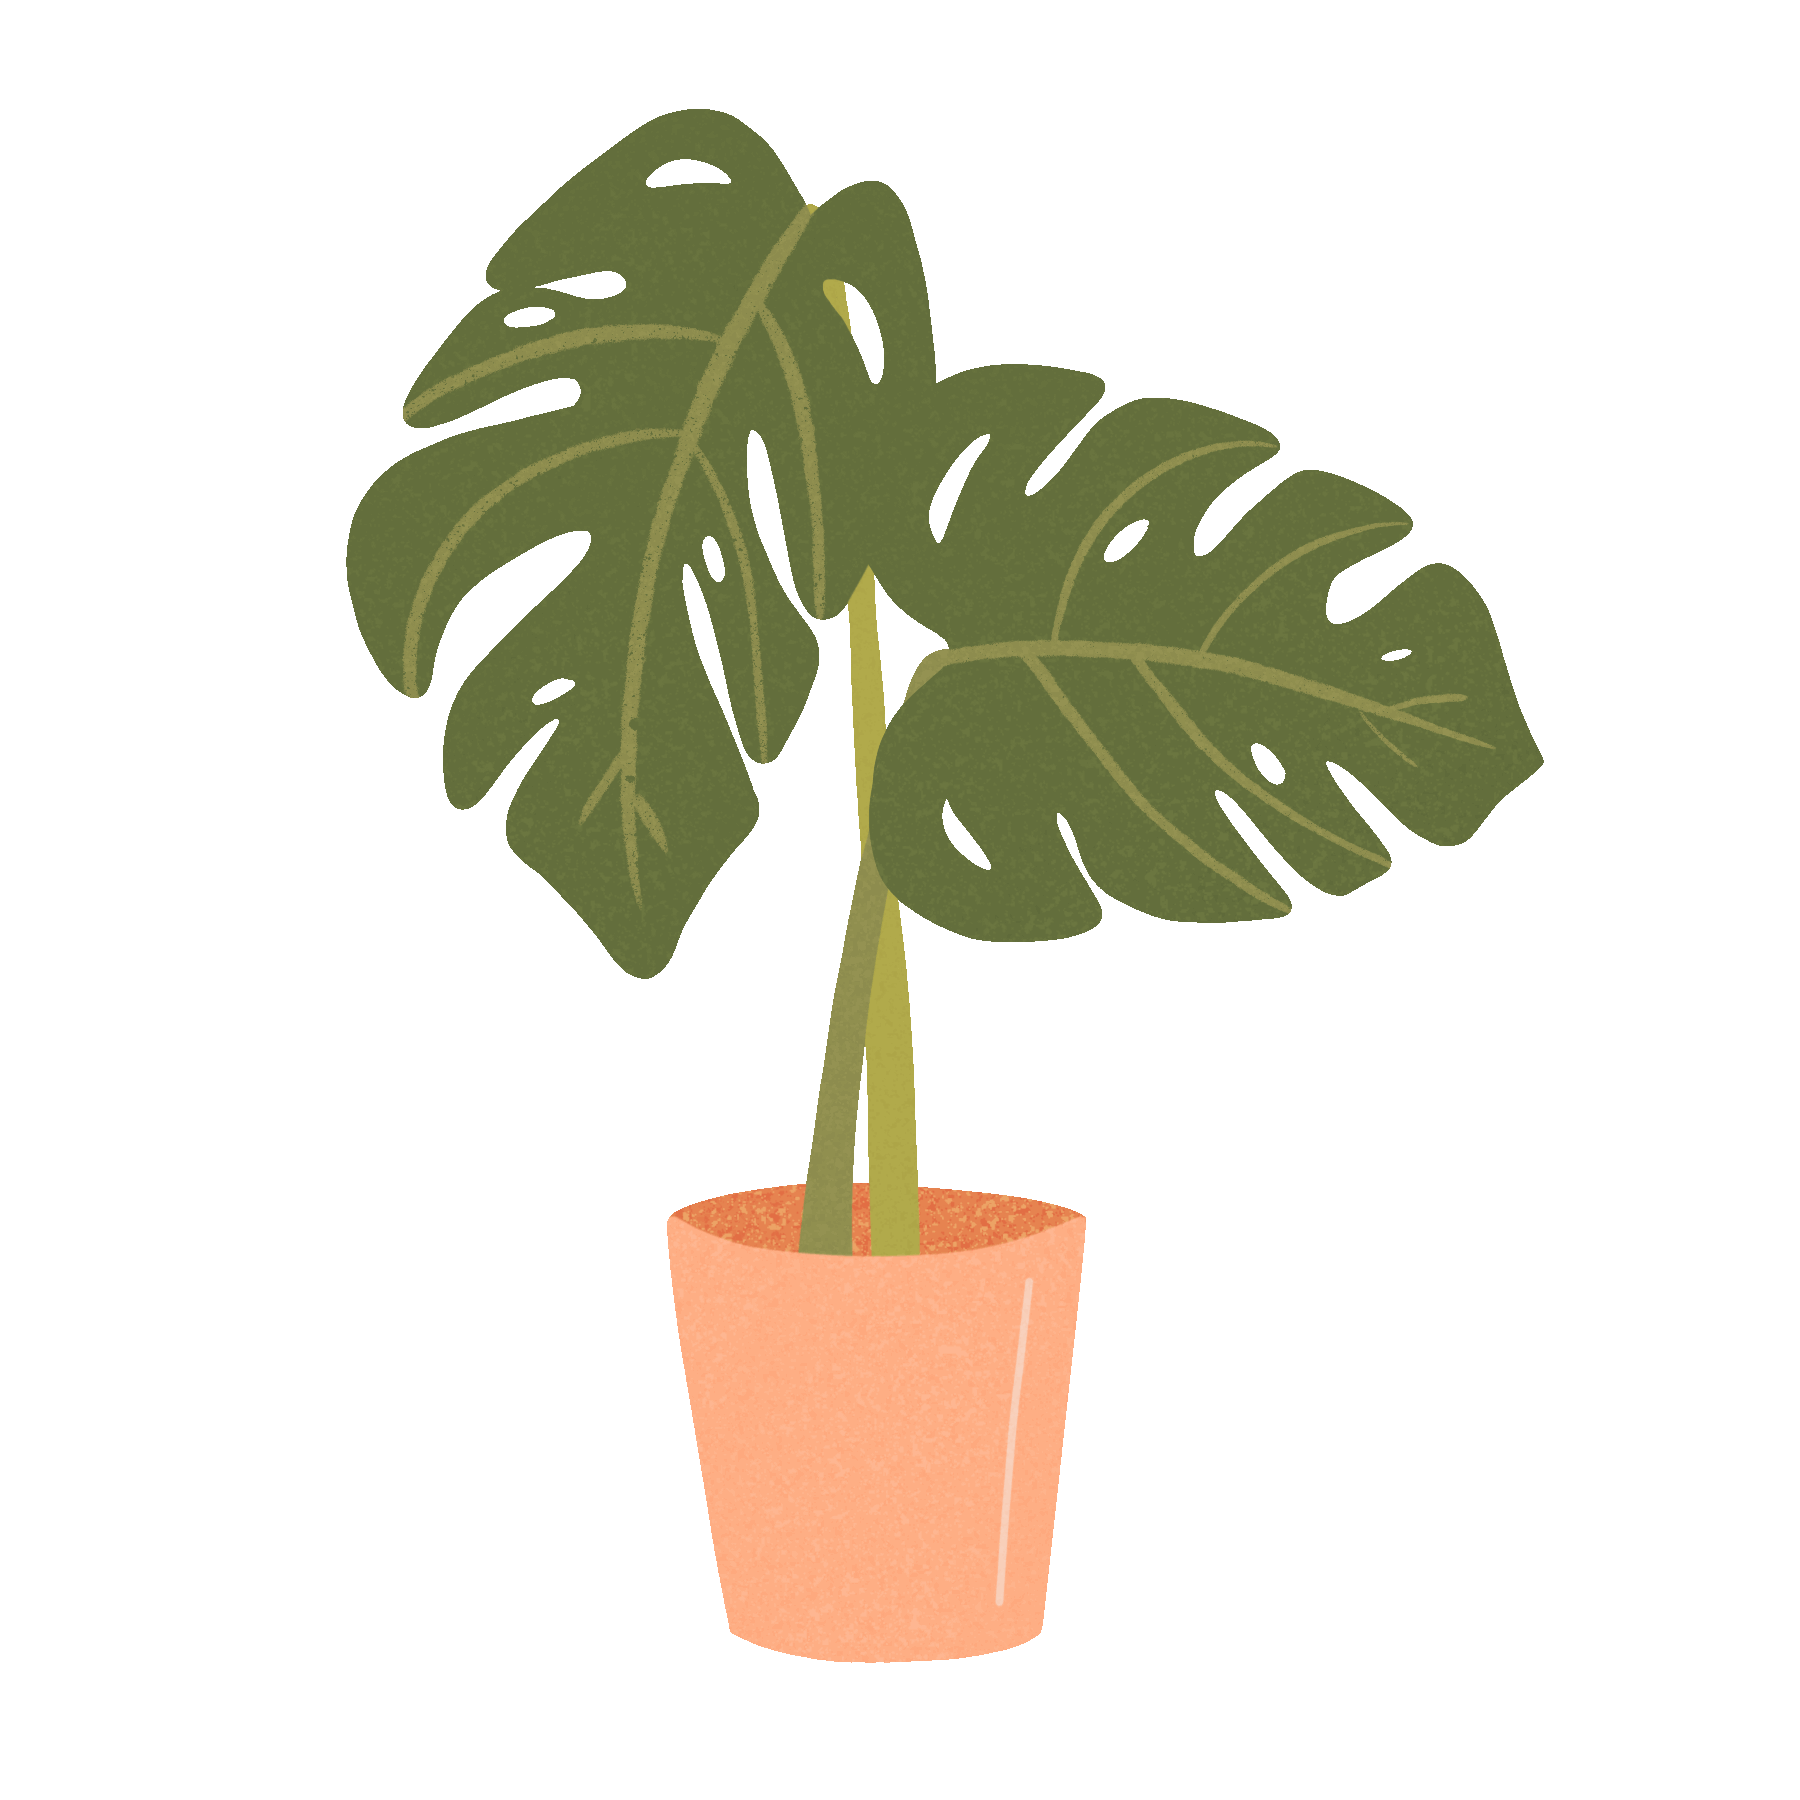 Plant Leaves Sticker by Liana Hughes Creative for iOS & Android | GIPHY